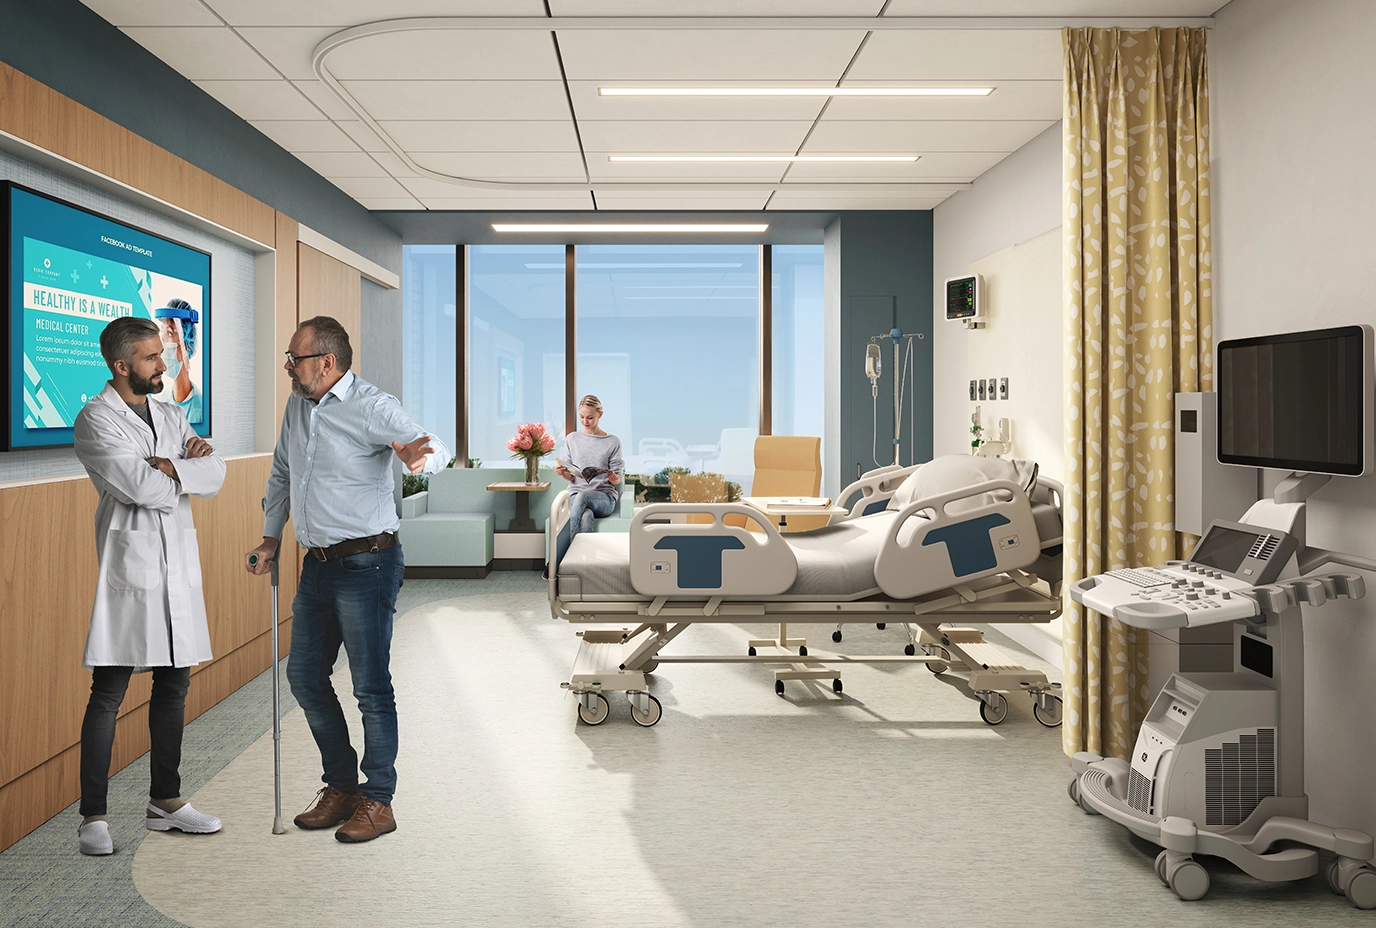 Rendering of new private patient rooms with a provider speaking to the family